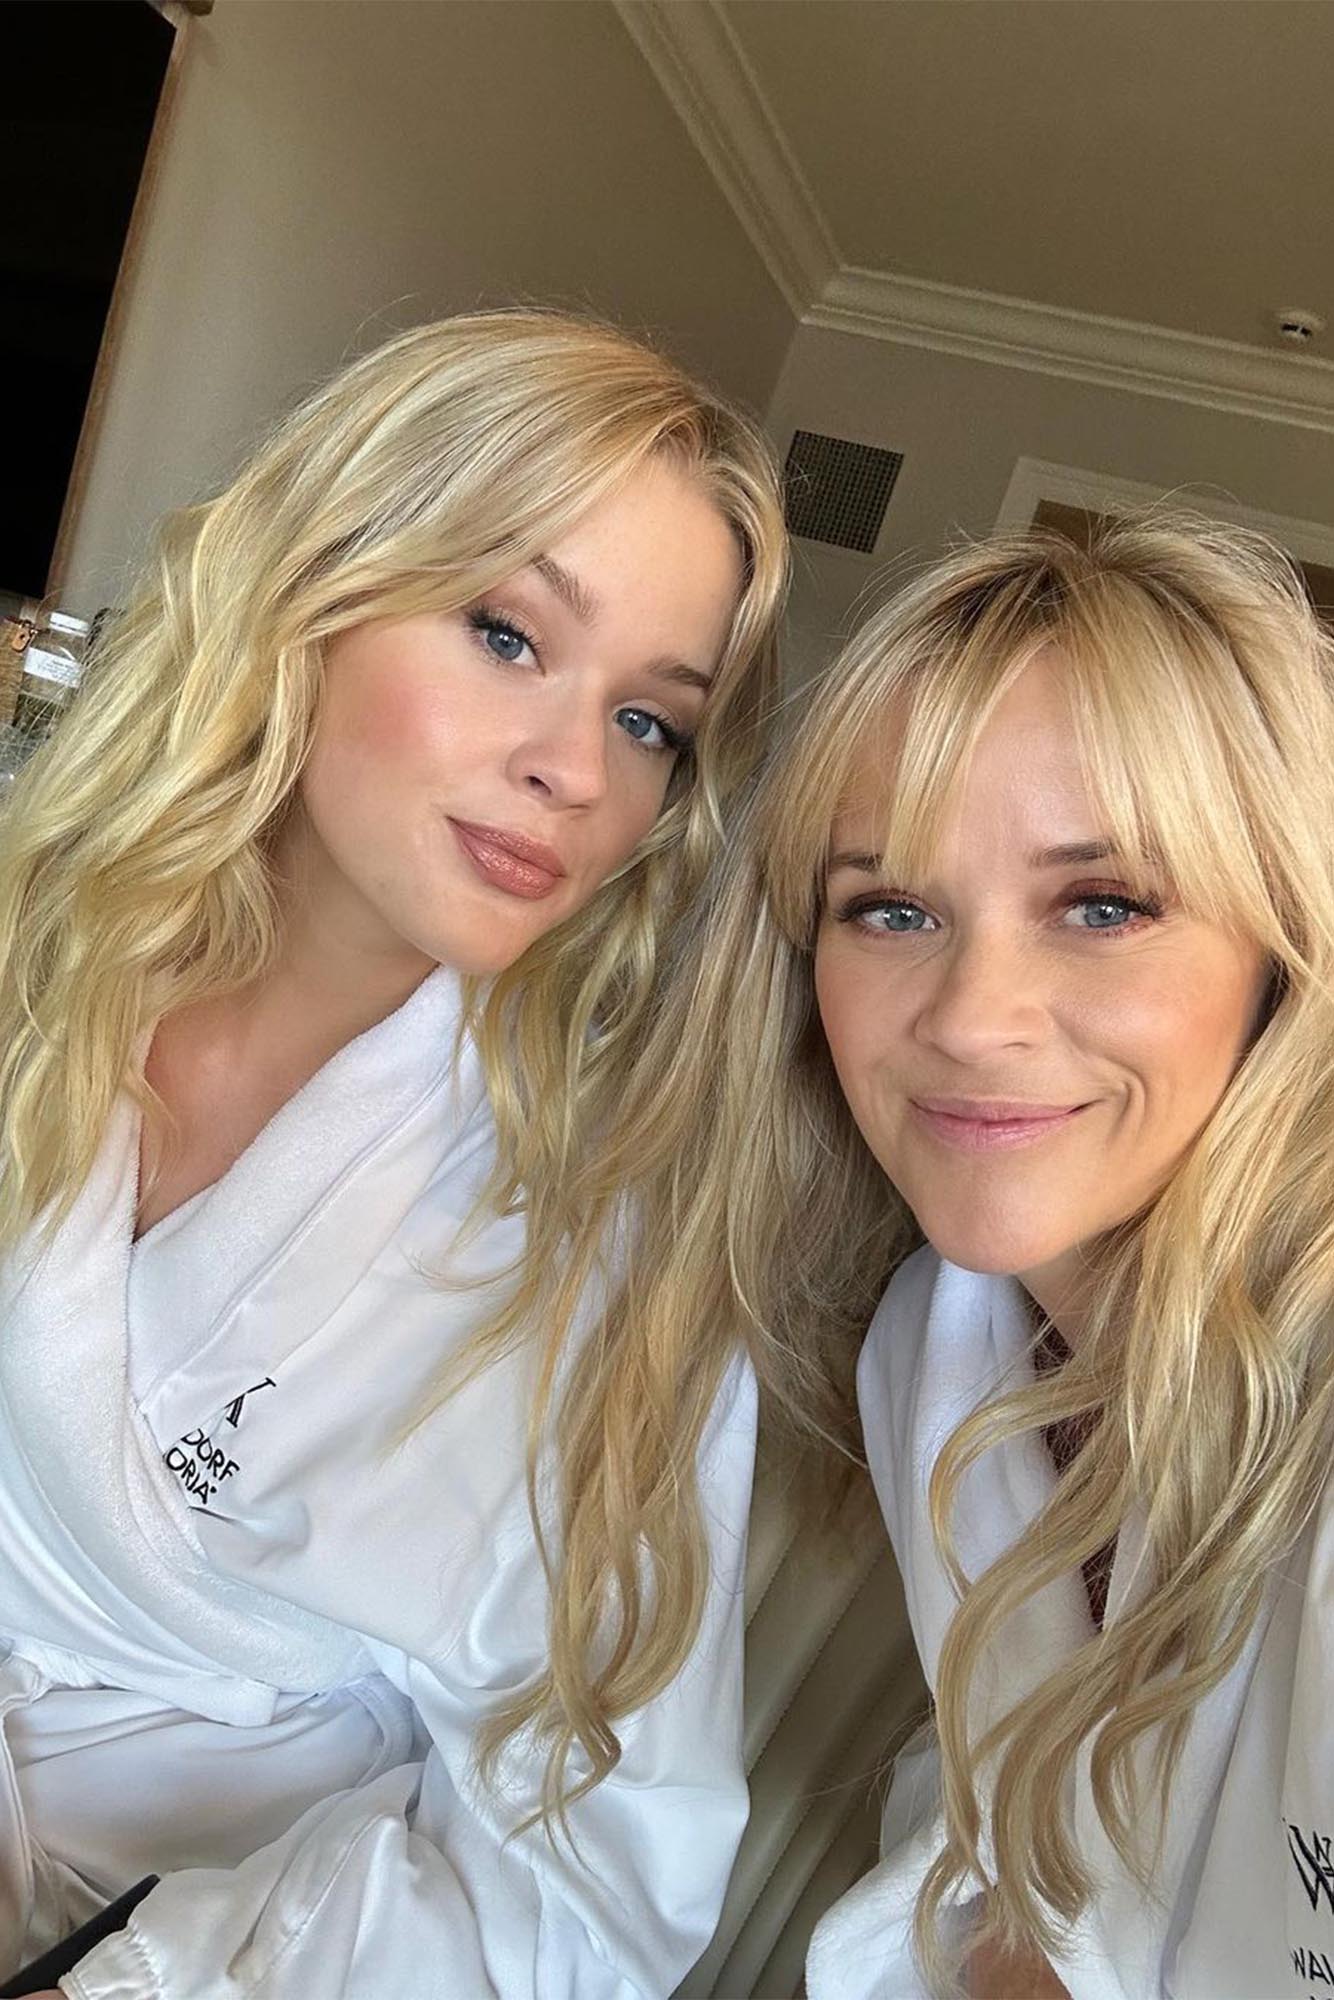 Double vision! Ava Phillippe, 23, twins with mom Reese Witherspoon before an event in Southern California.